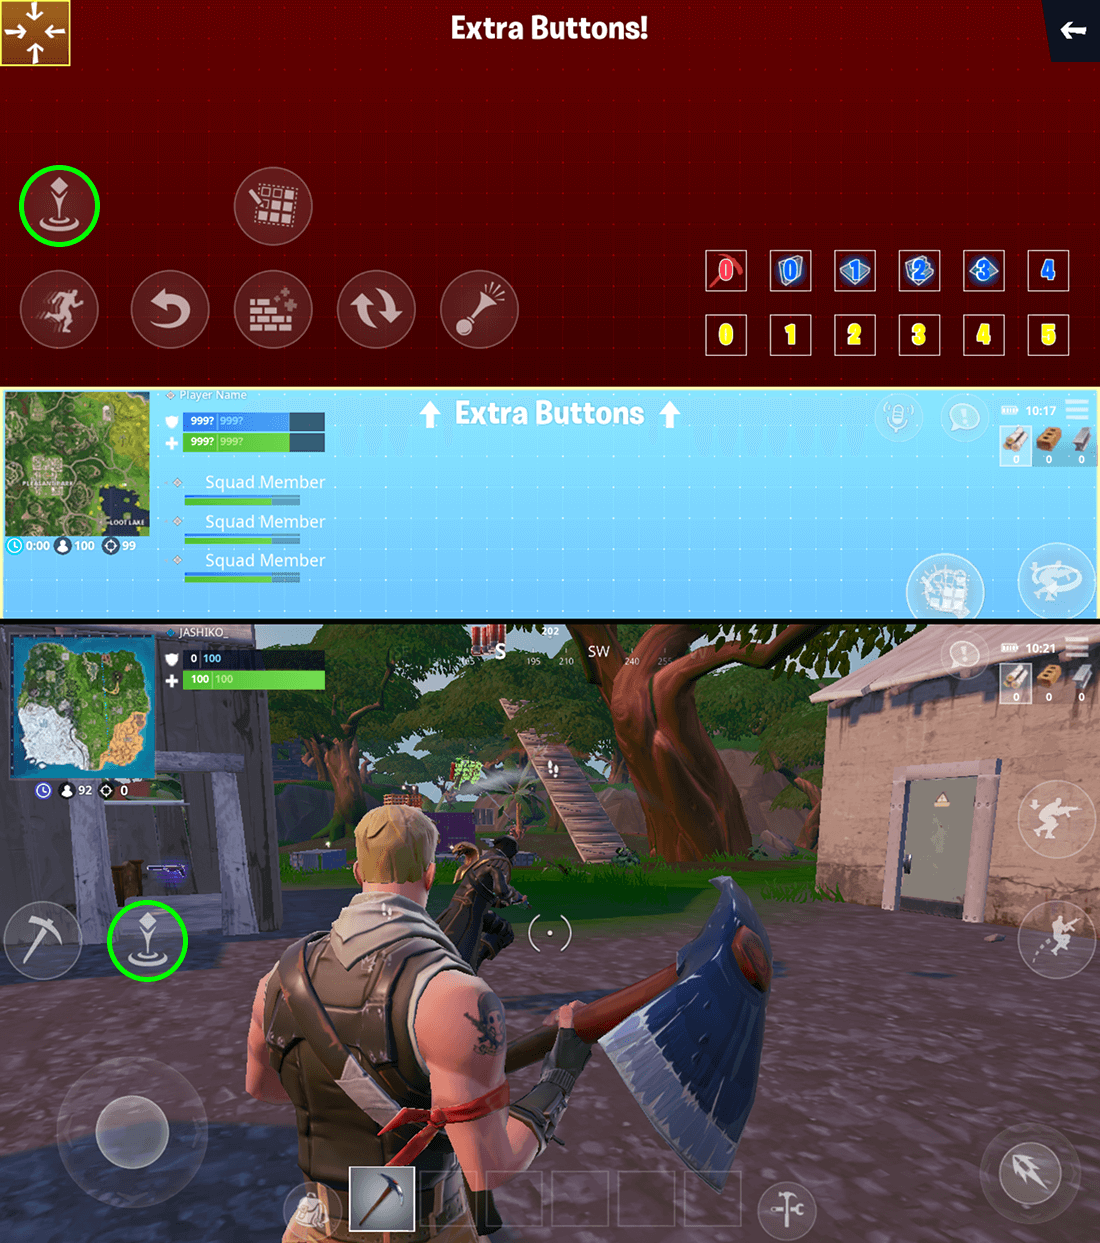 How To Use The Ping Feature On Fortn!   ite Mobile Enable Ping In - how do you use ping on fortnite mobile